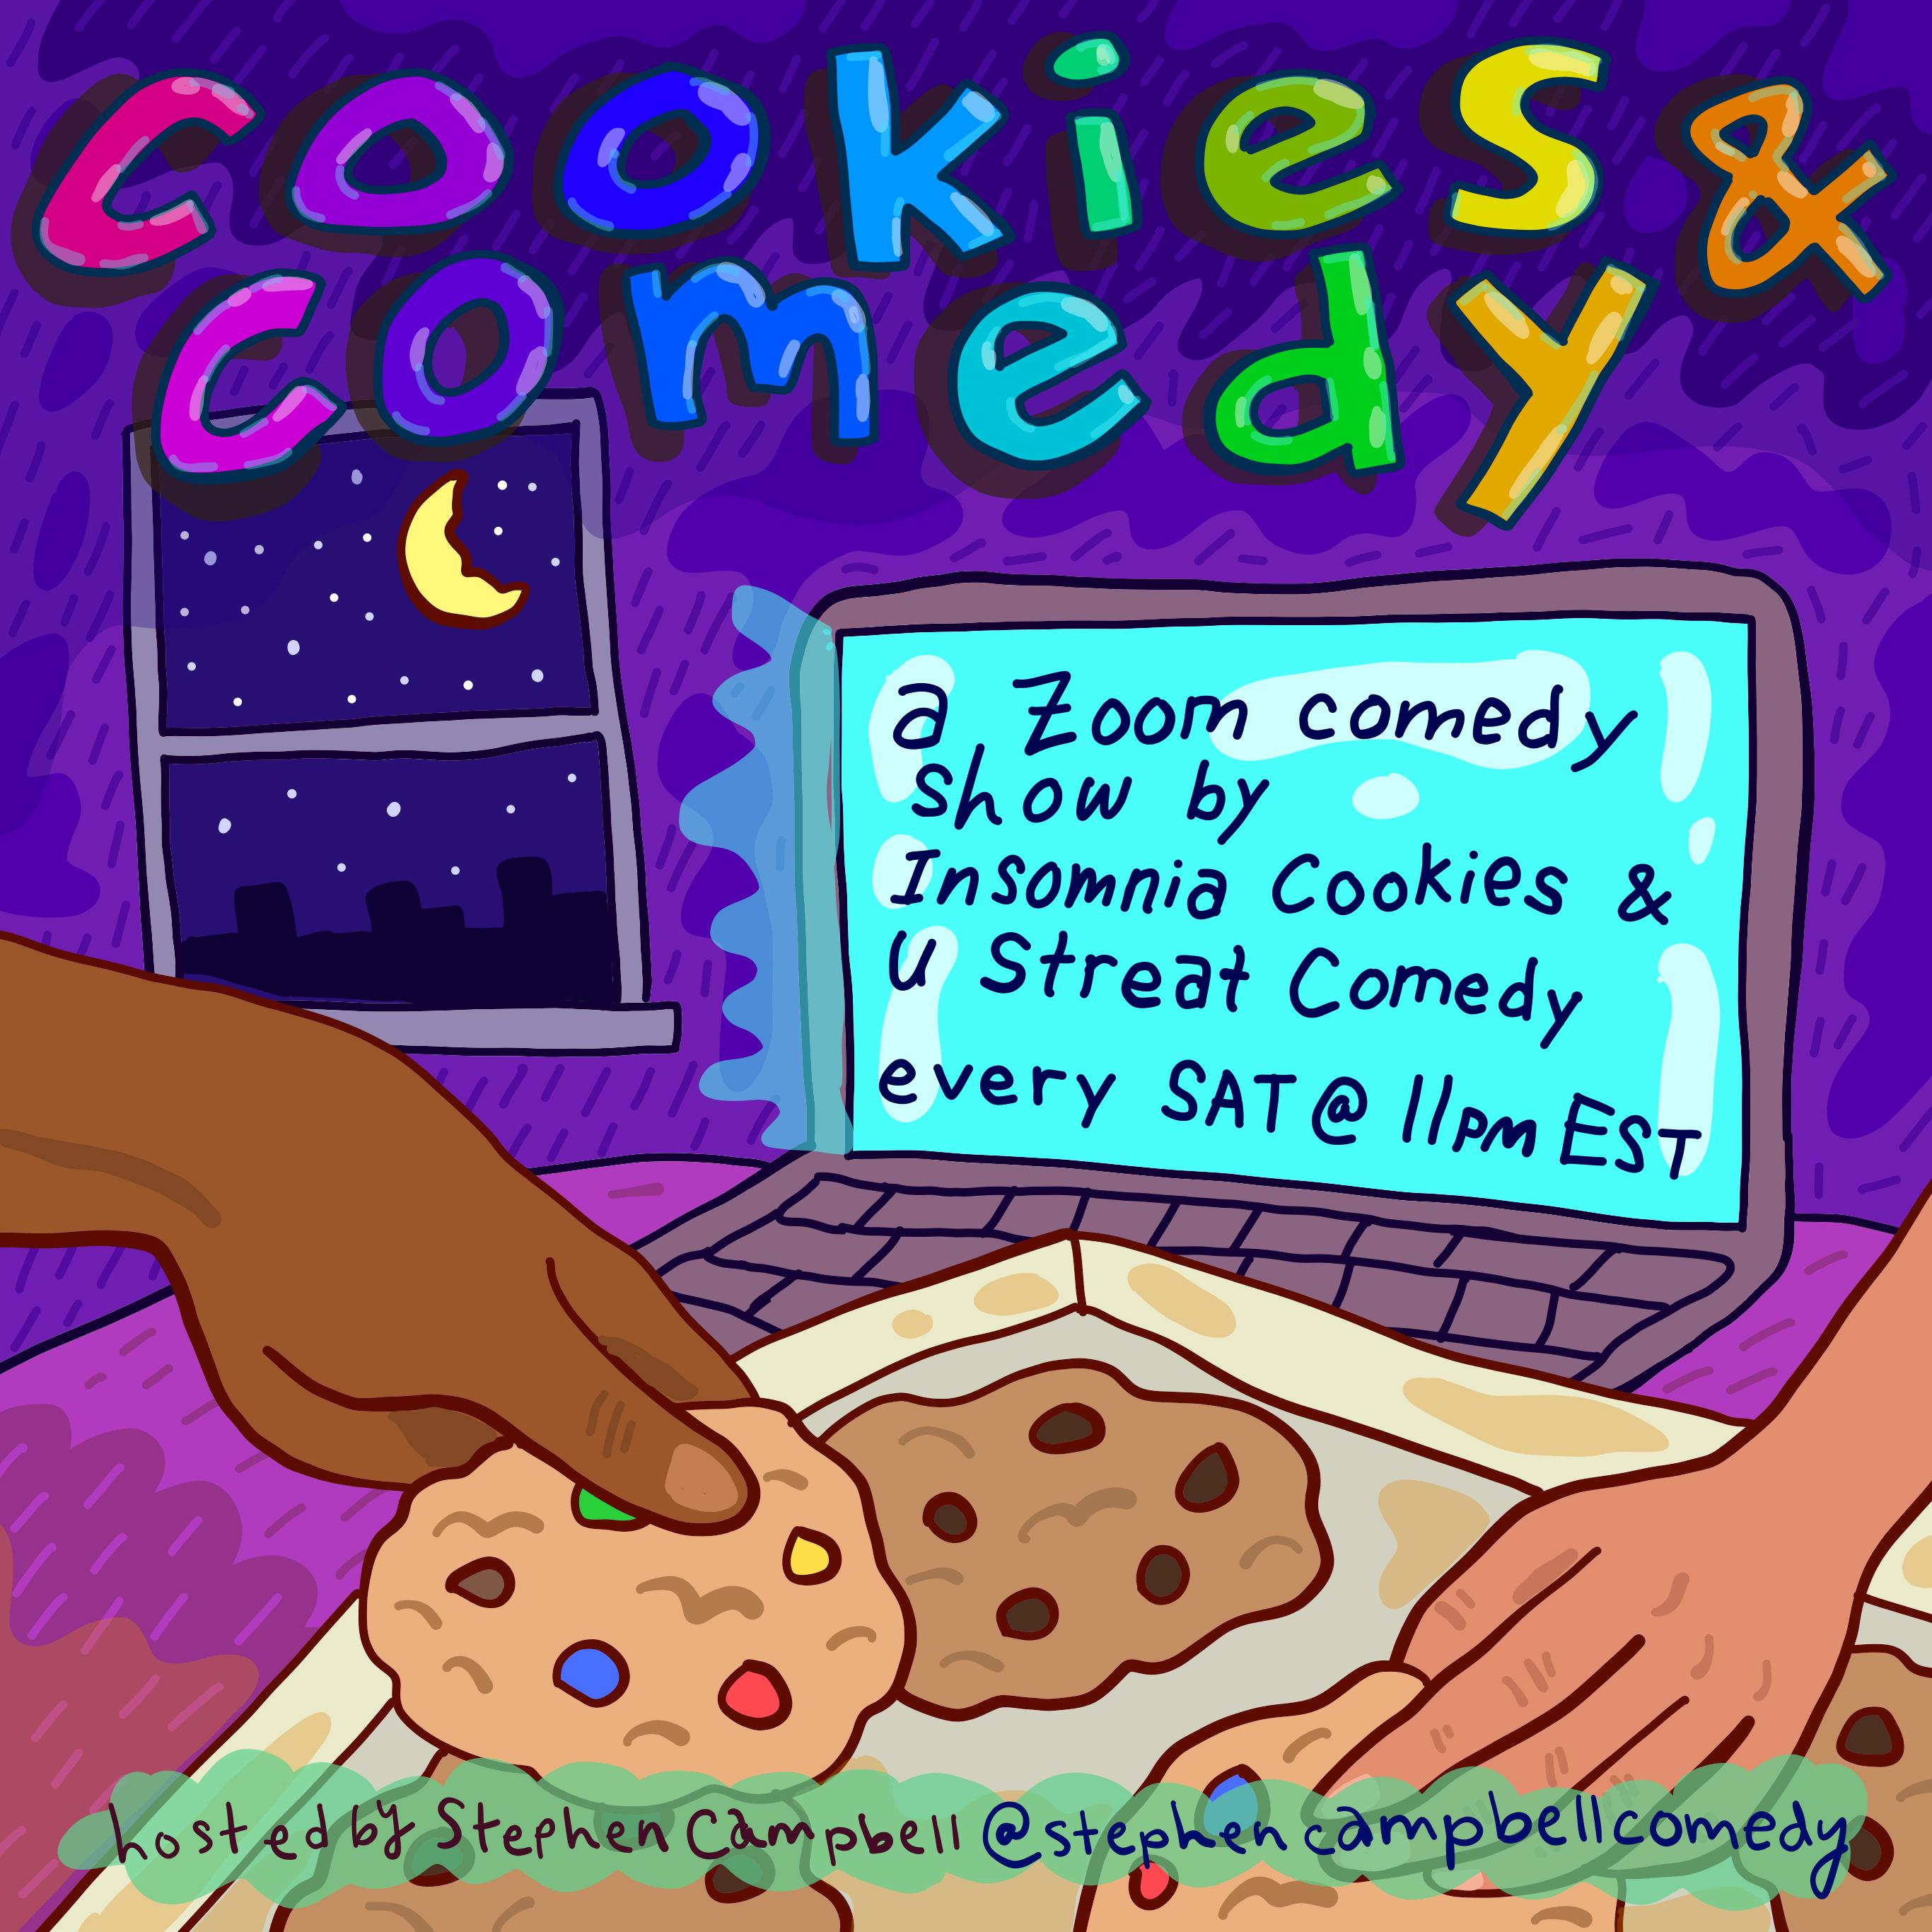 Cookies and Comedy!